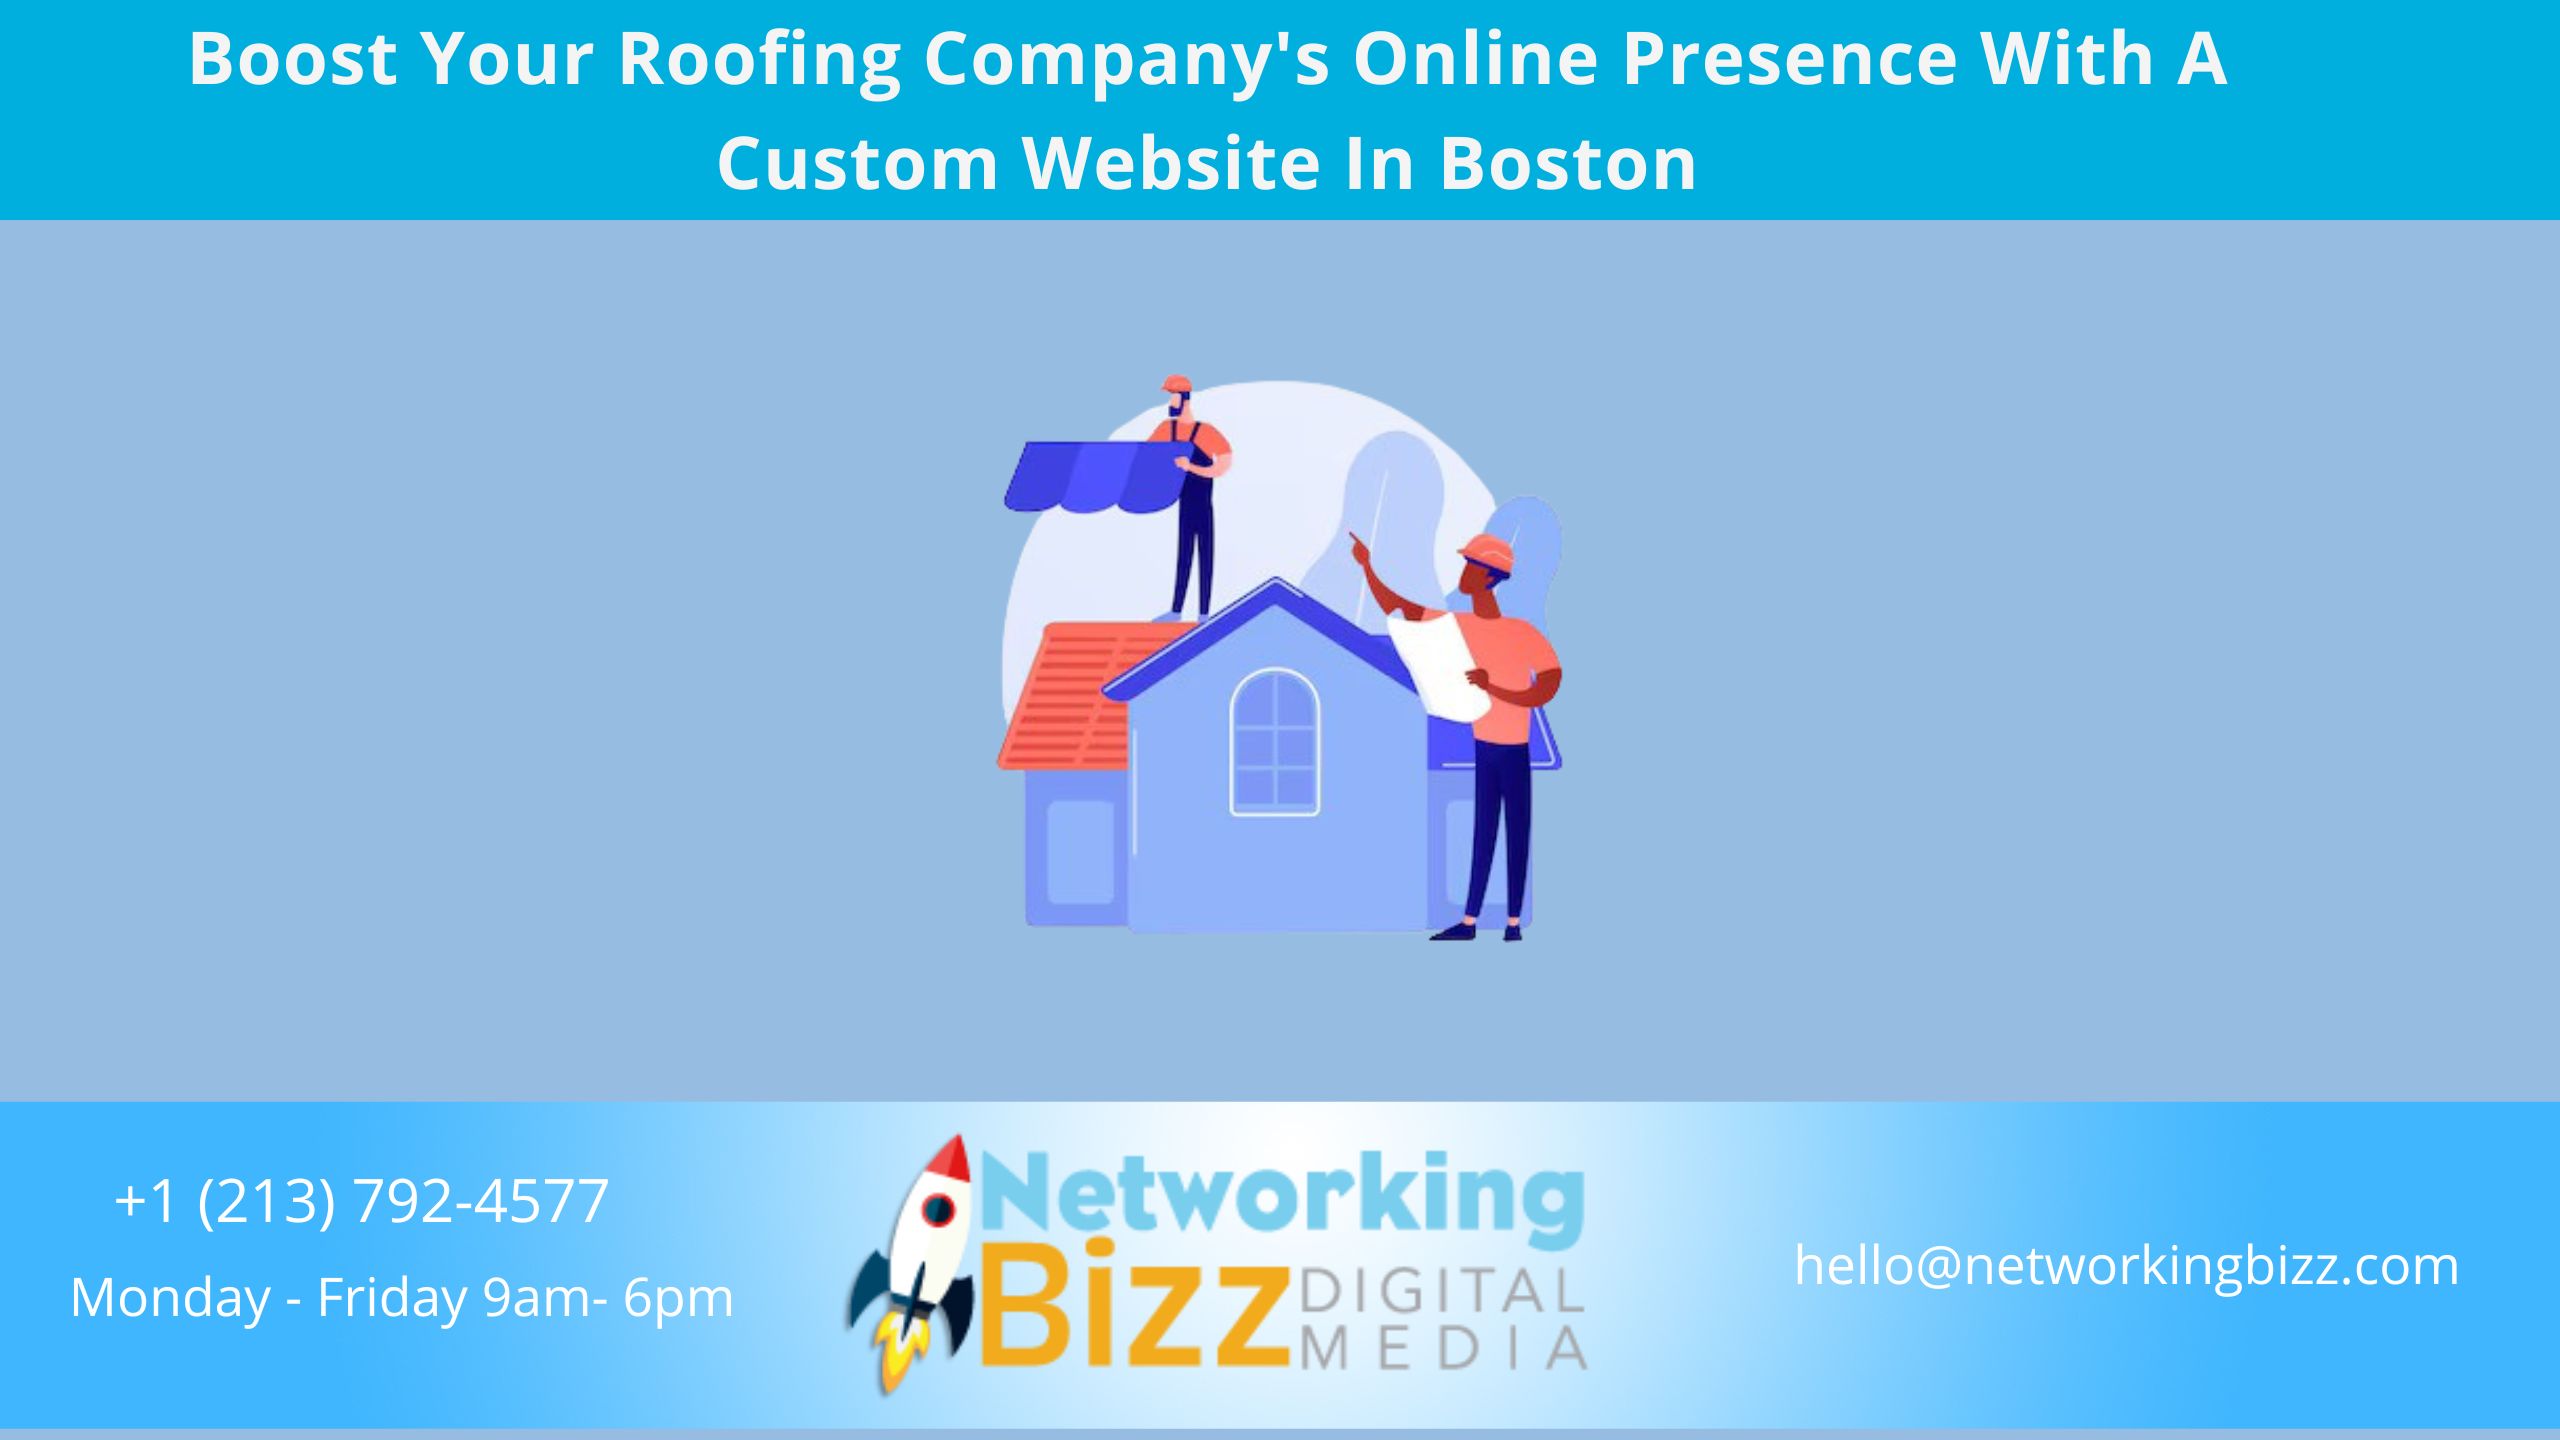 Boost Your Roofing Company’s Online Presence With A Custom Website In Boston